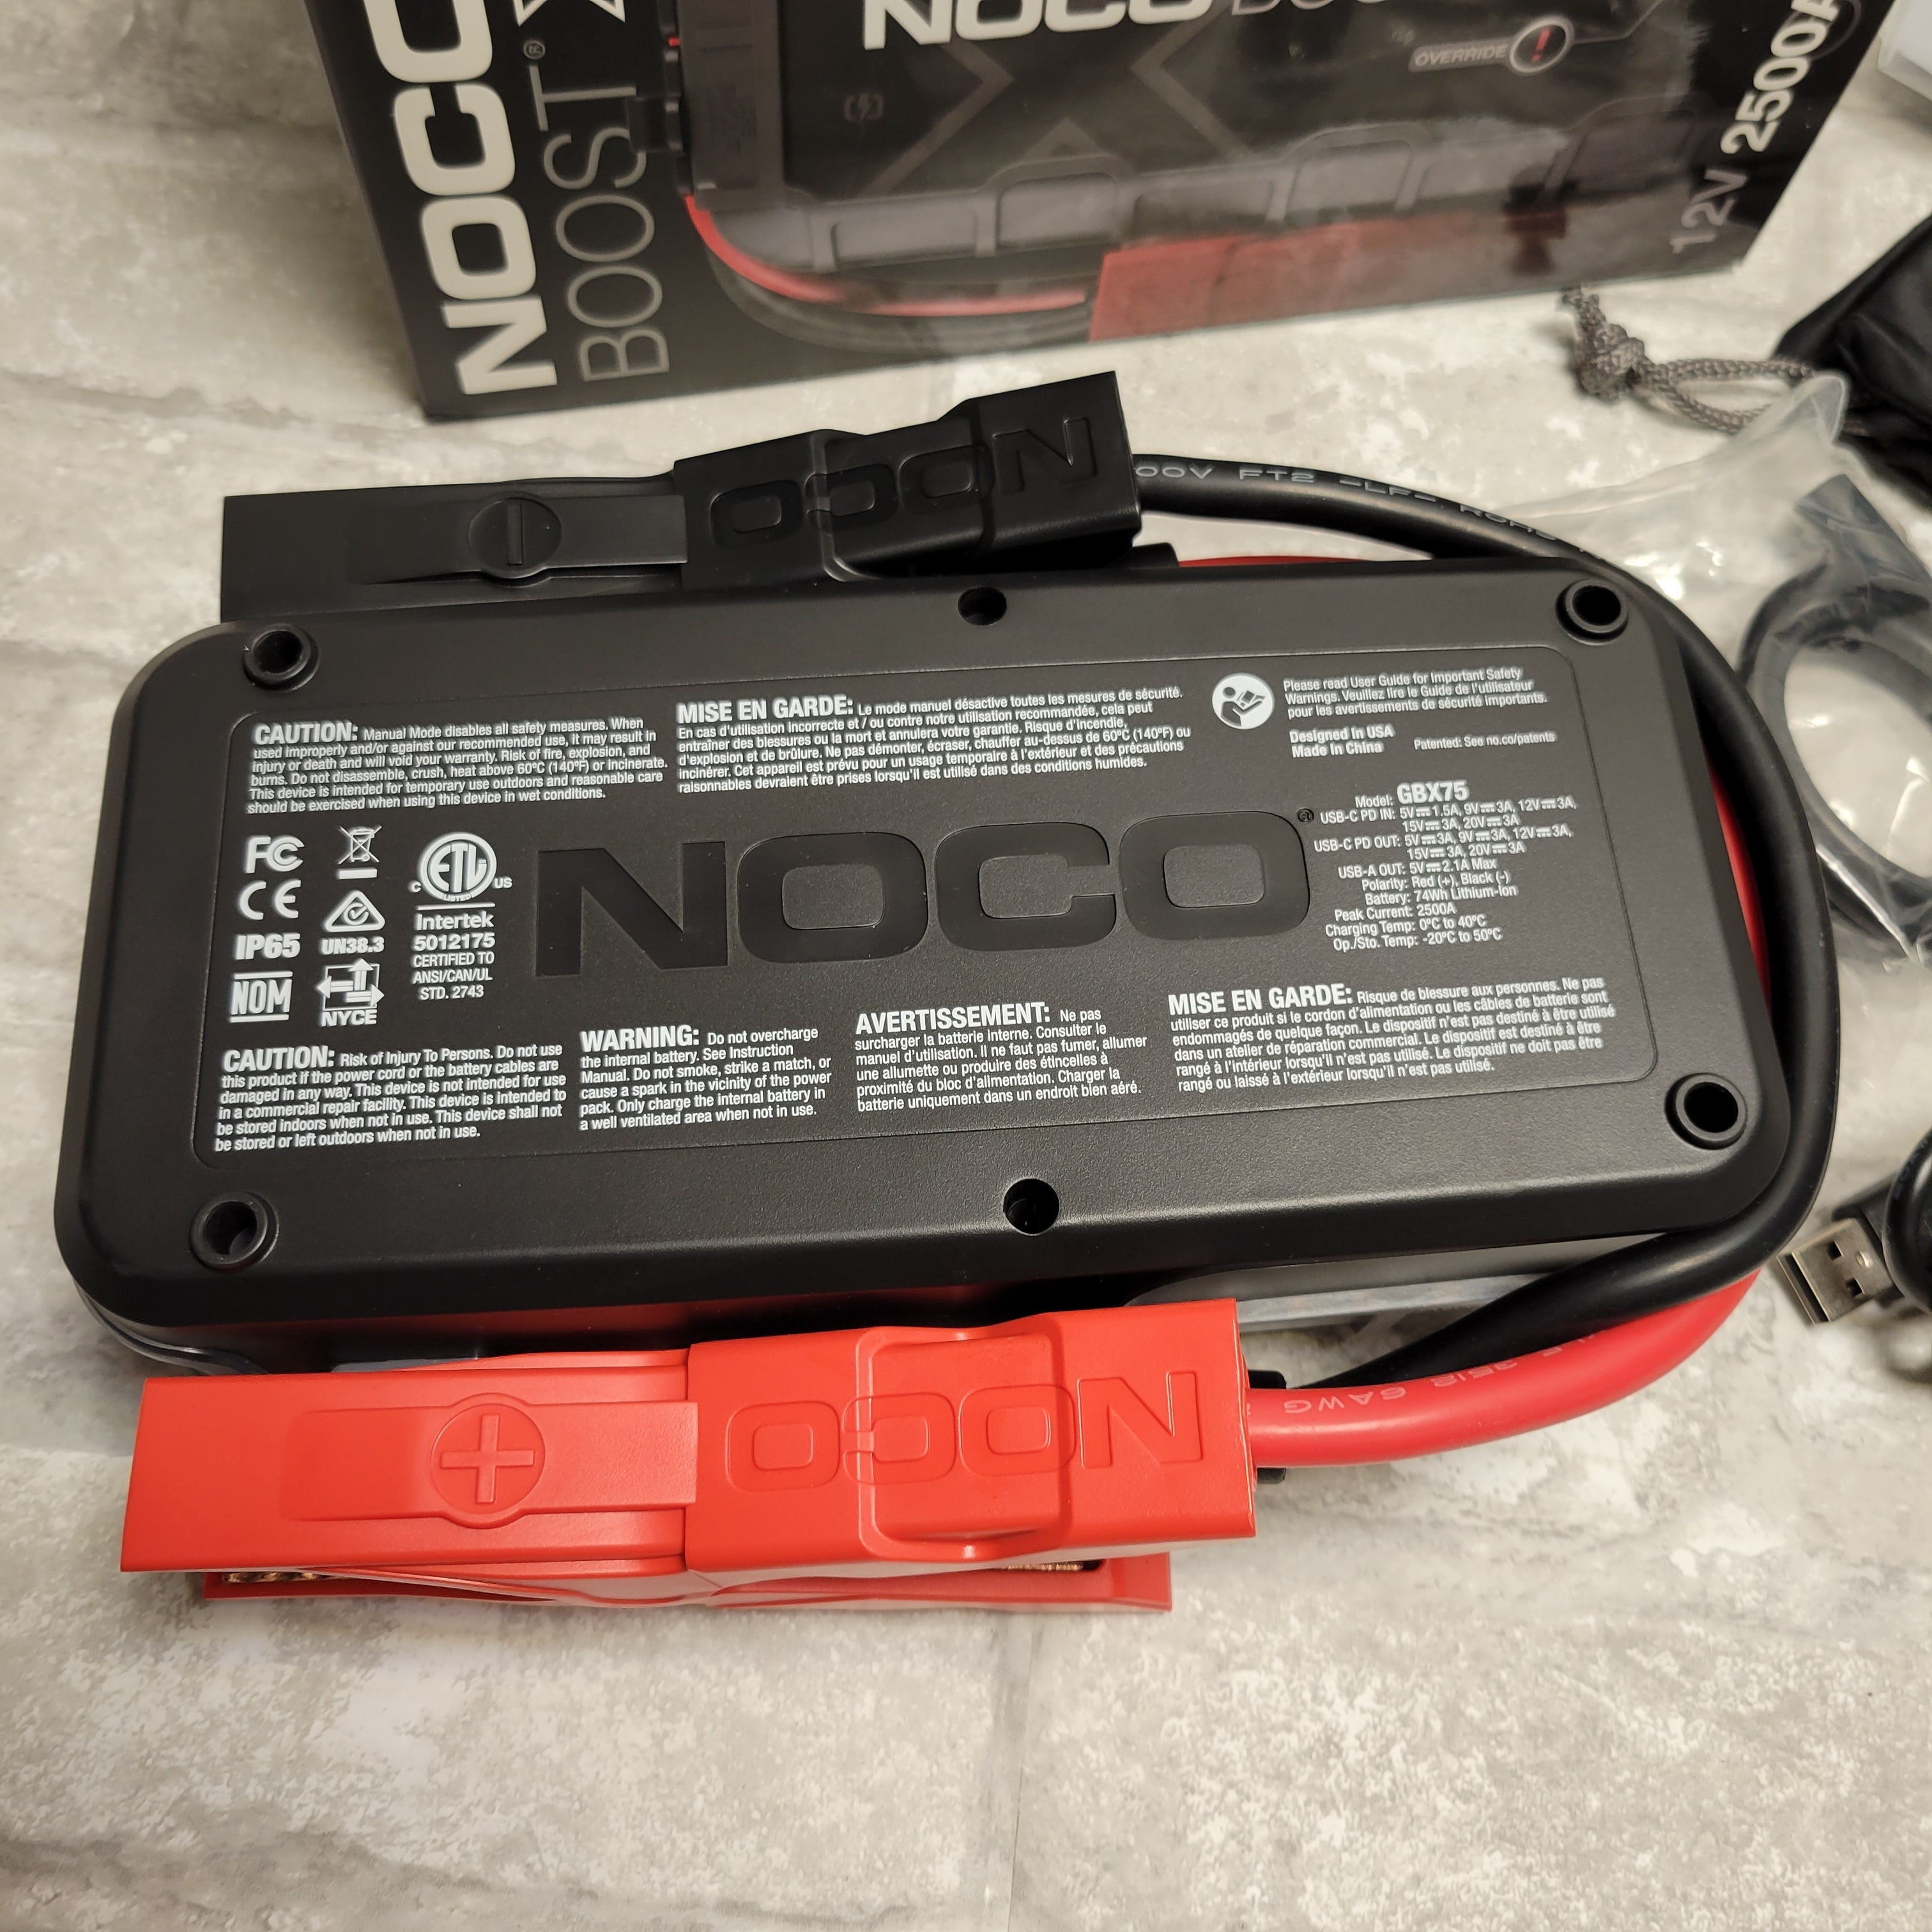 NOCO Boost X GBX75 2500A 12V UltraSafe Portable Lithium Jump Starter (8045141557486)